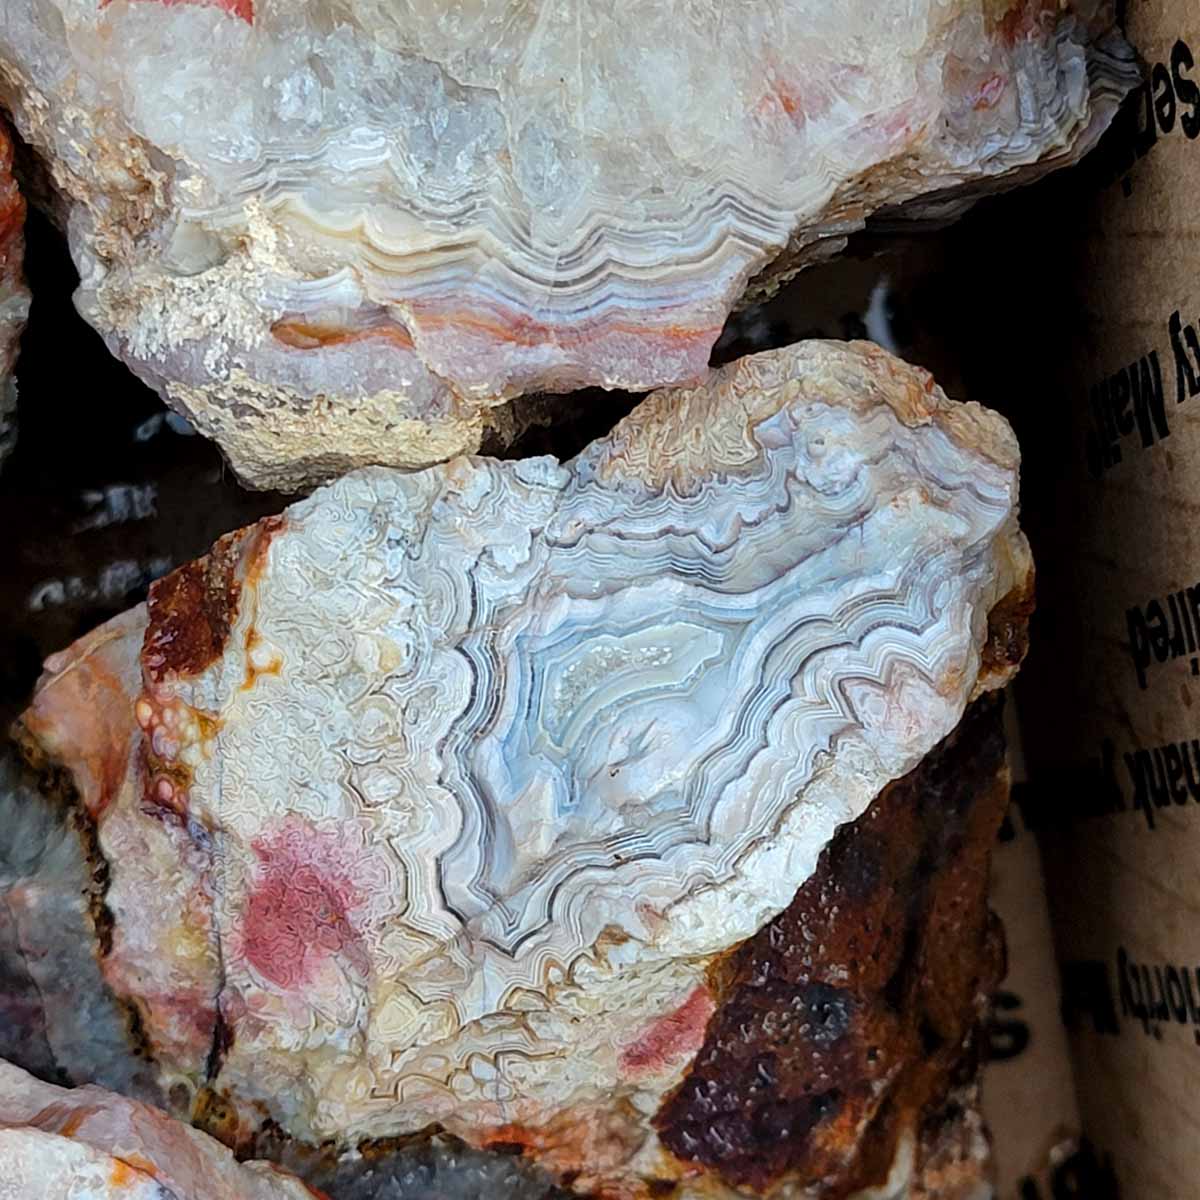 Mexican Crazy Lace Agate Rough Flatrate!